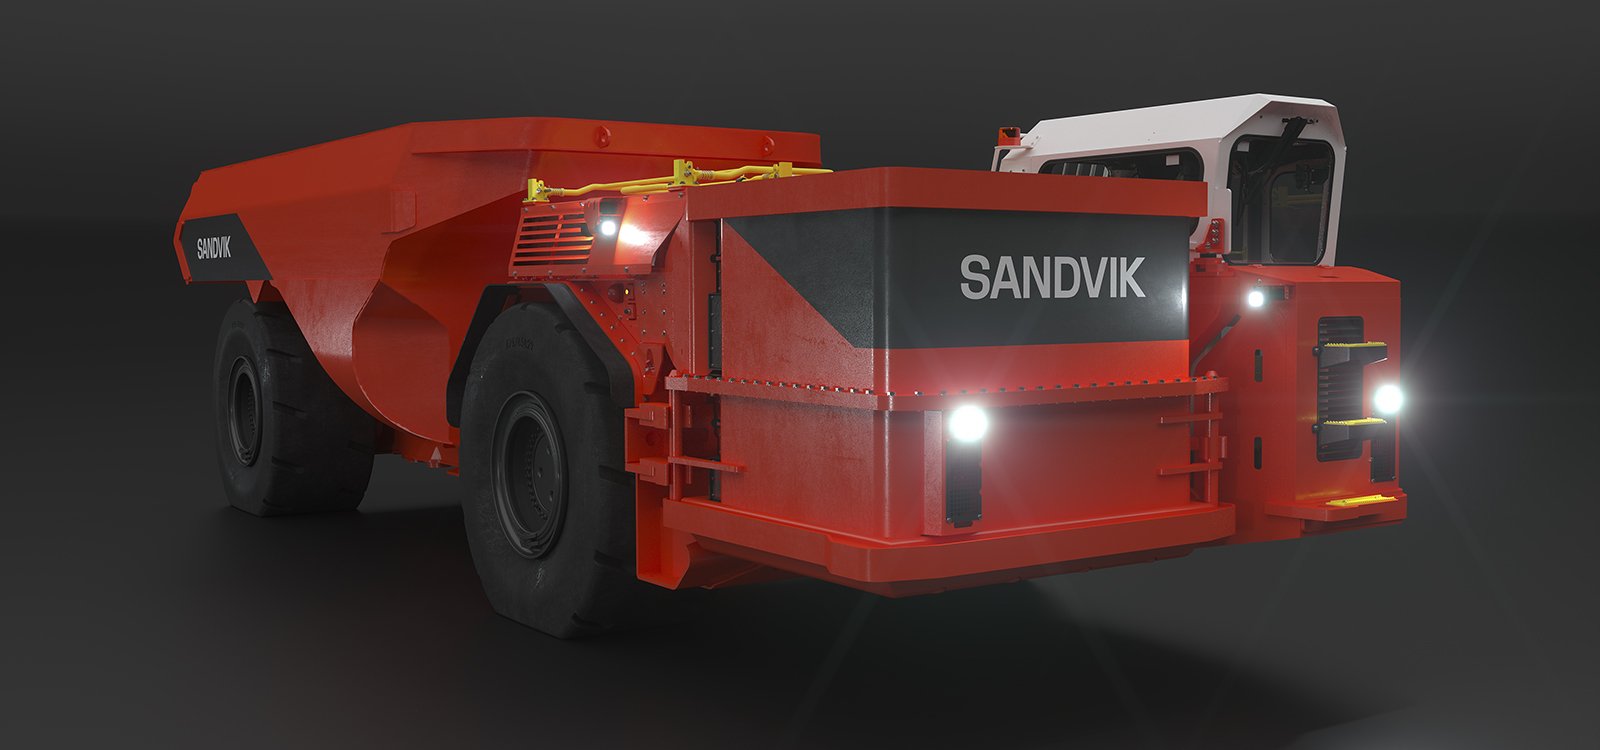 Sandvik TH550B is rated for 50 tonnes of load capacity.